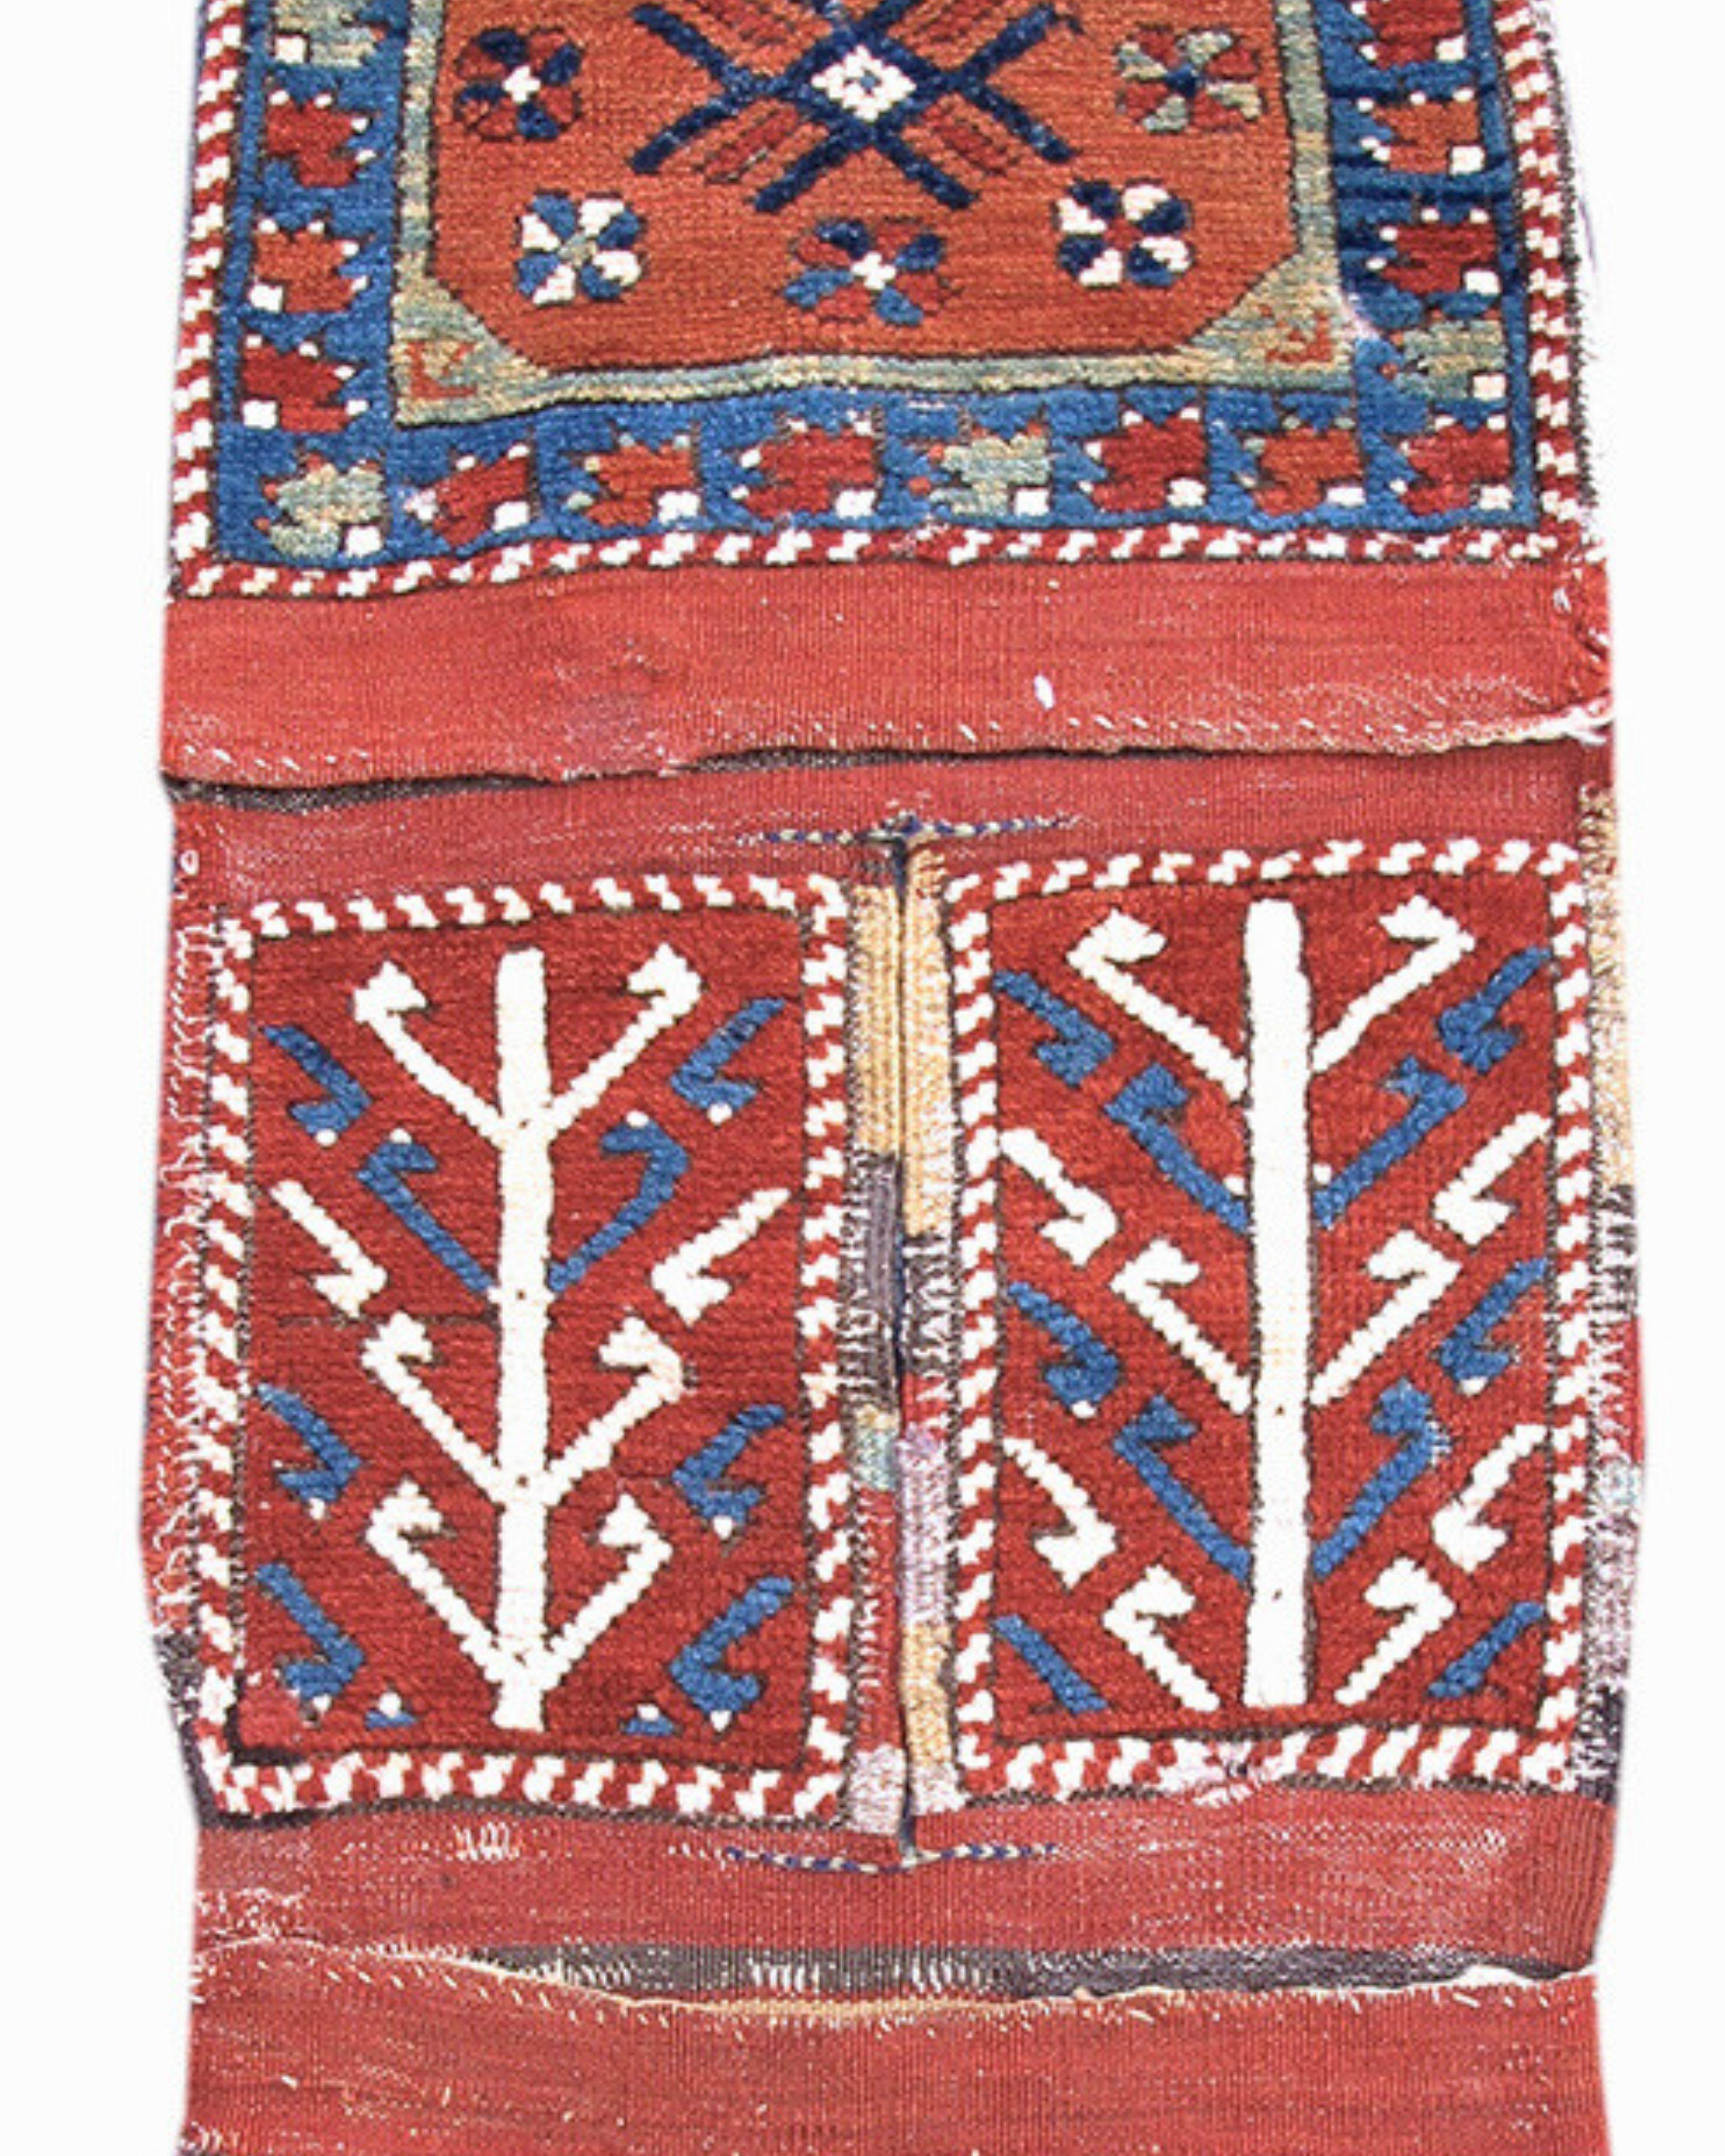 Hand-Woven Antique Anatolian Bergama Heybe Bags, Late 19th Century For Sale